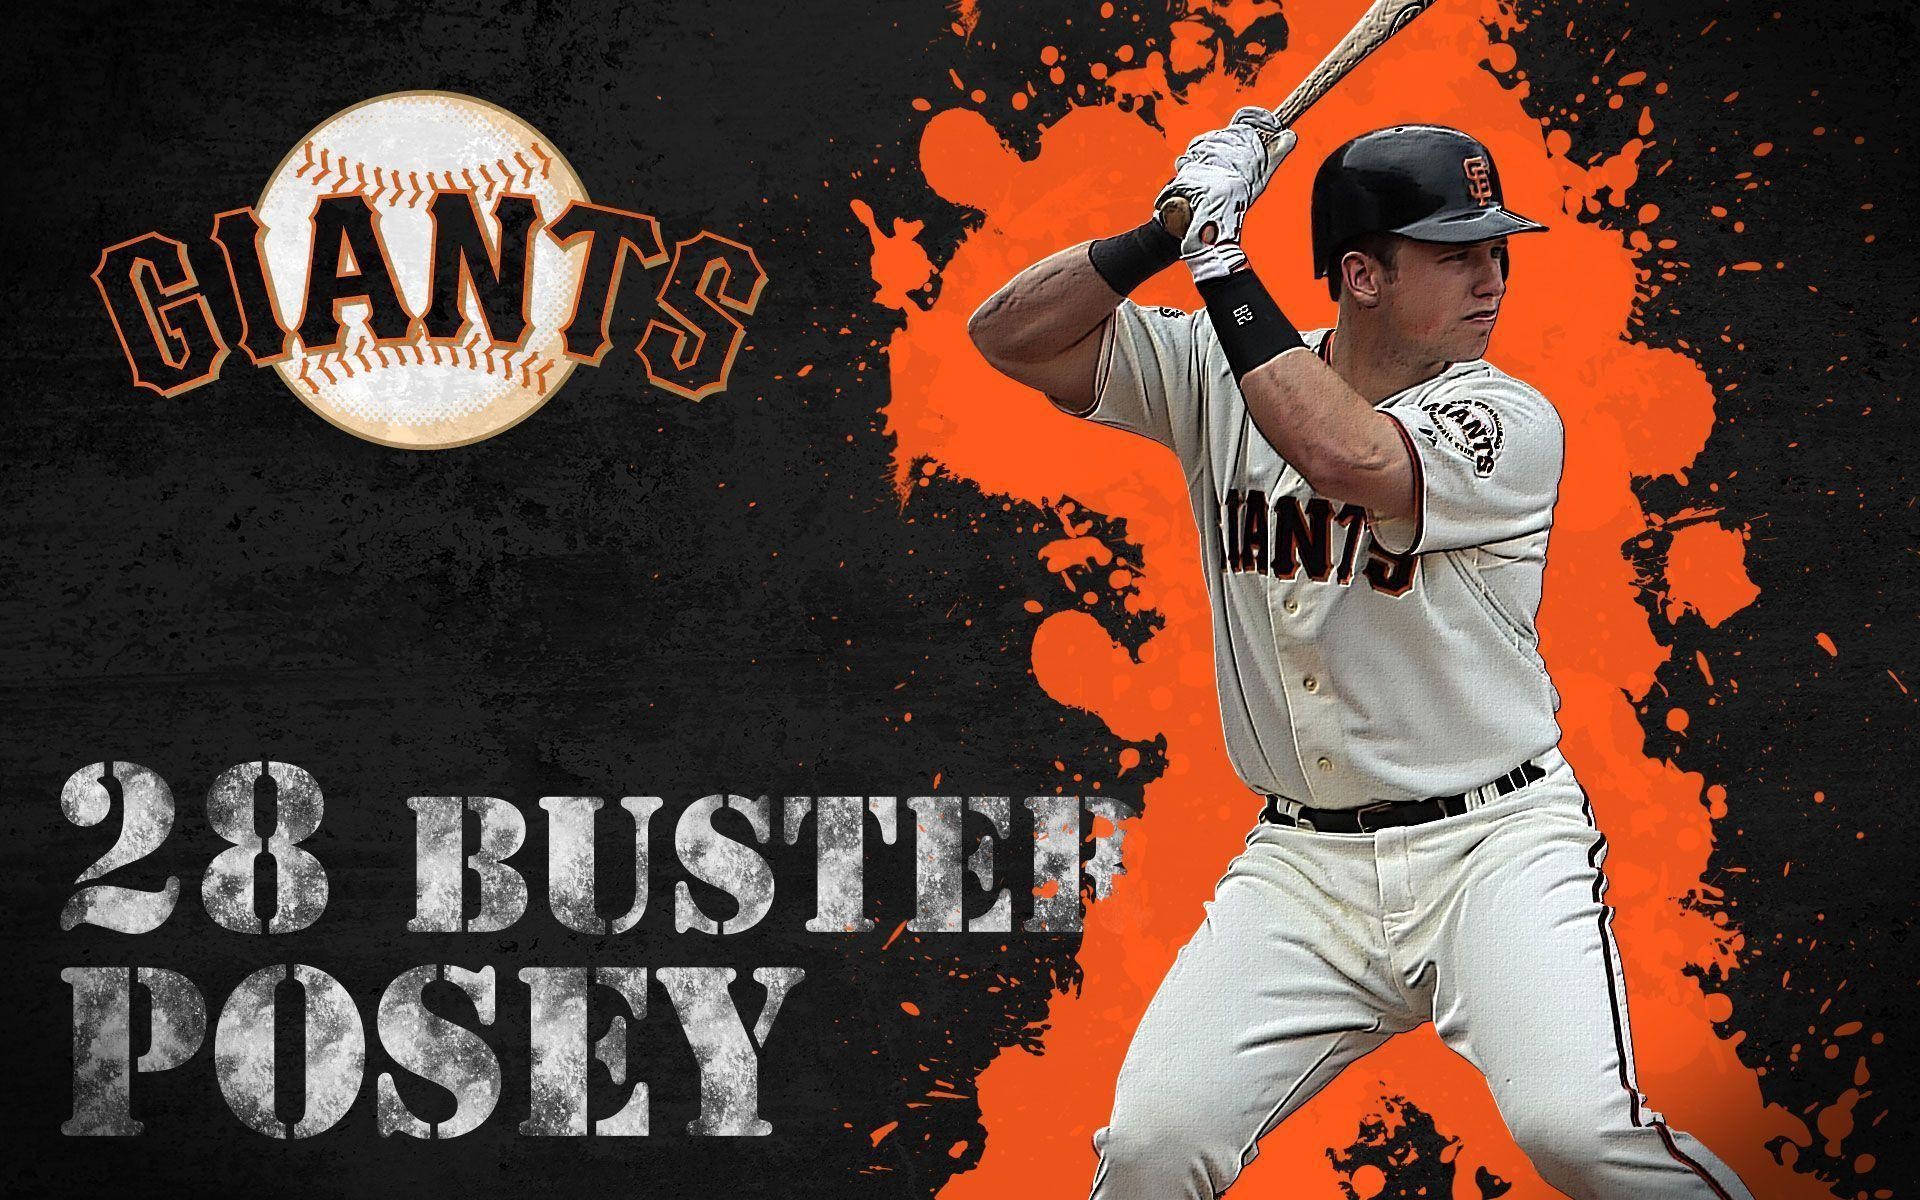 Free Wallpapers – Buster Posey wallpaper